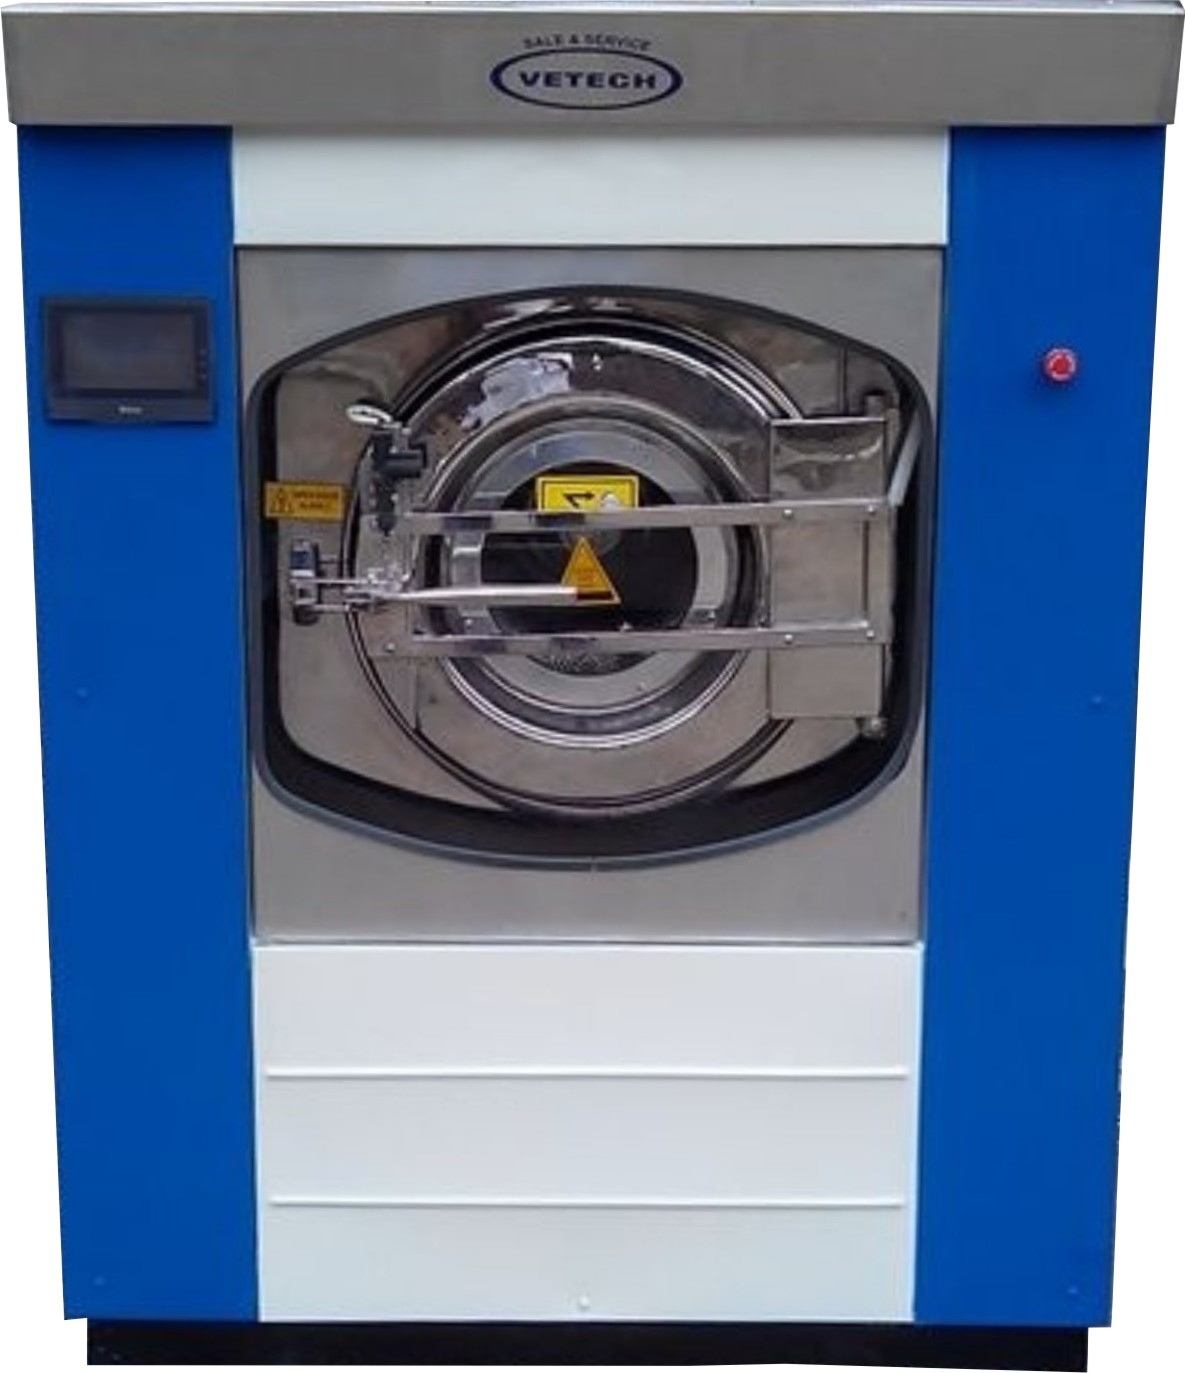 Industrial Washer Extractor